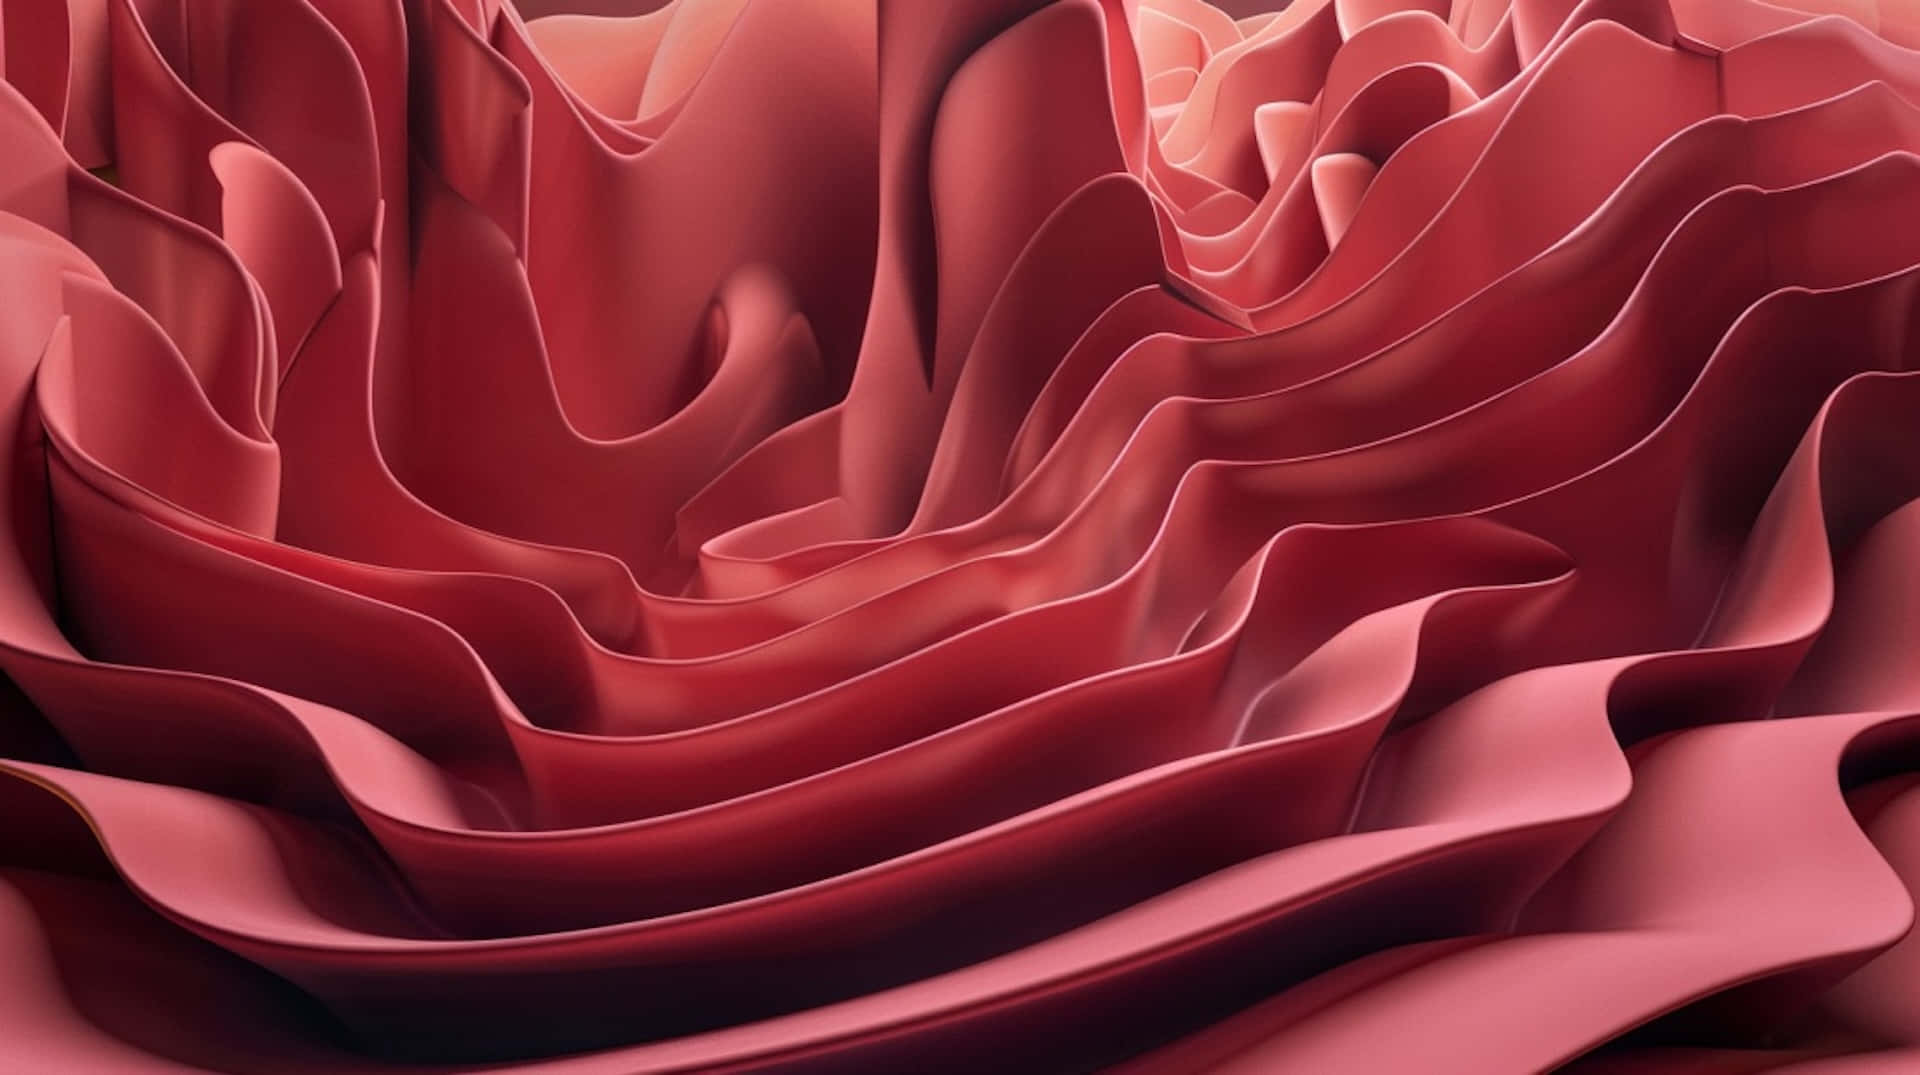 Abstract Burgundy Waves Wallpaper